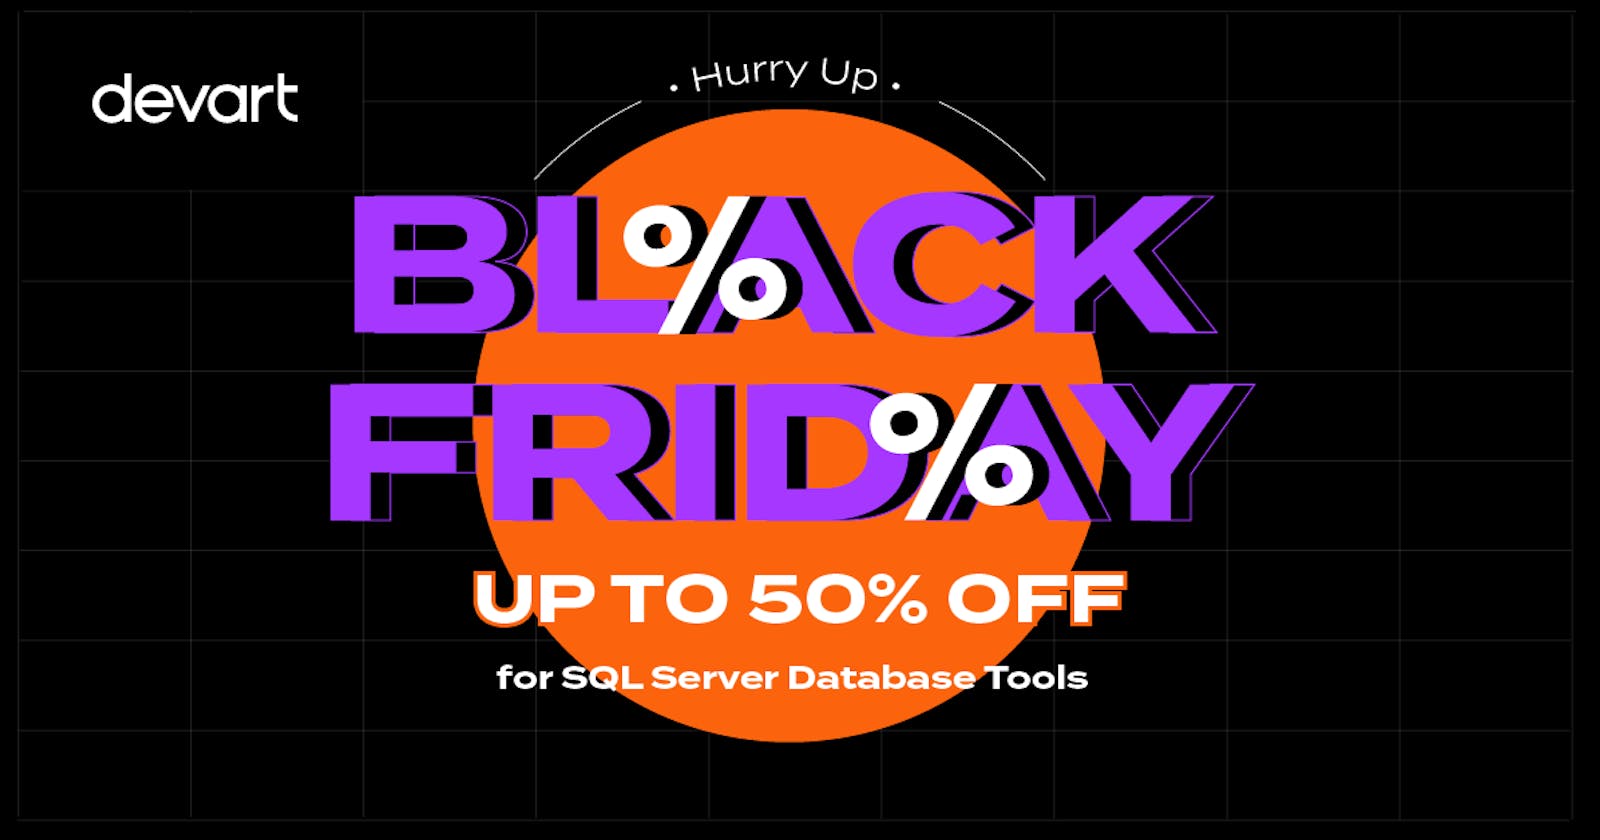 Shop Devart database tools and save up to 50% on Black Friday!